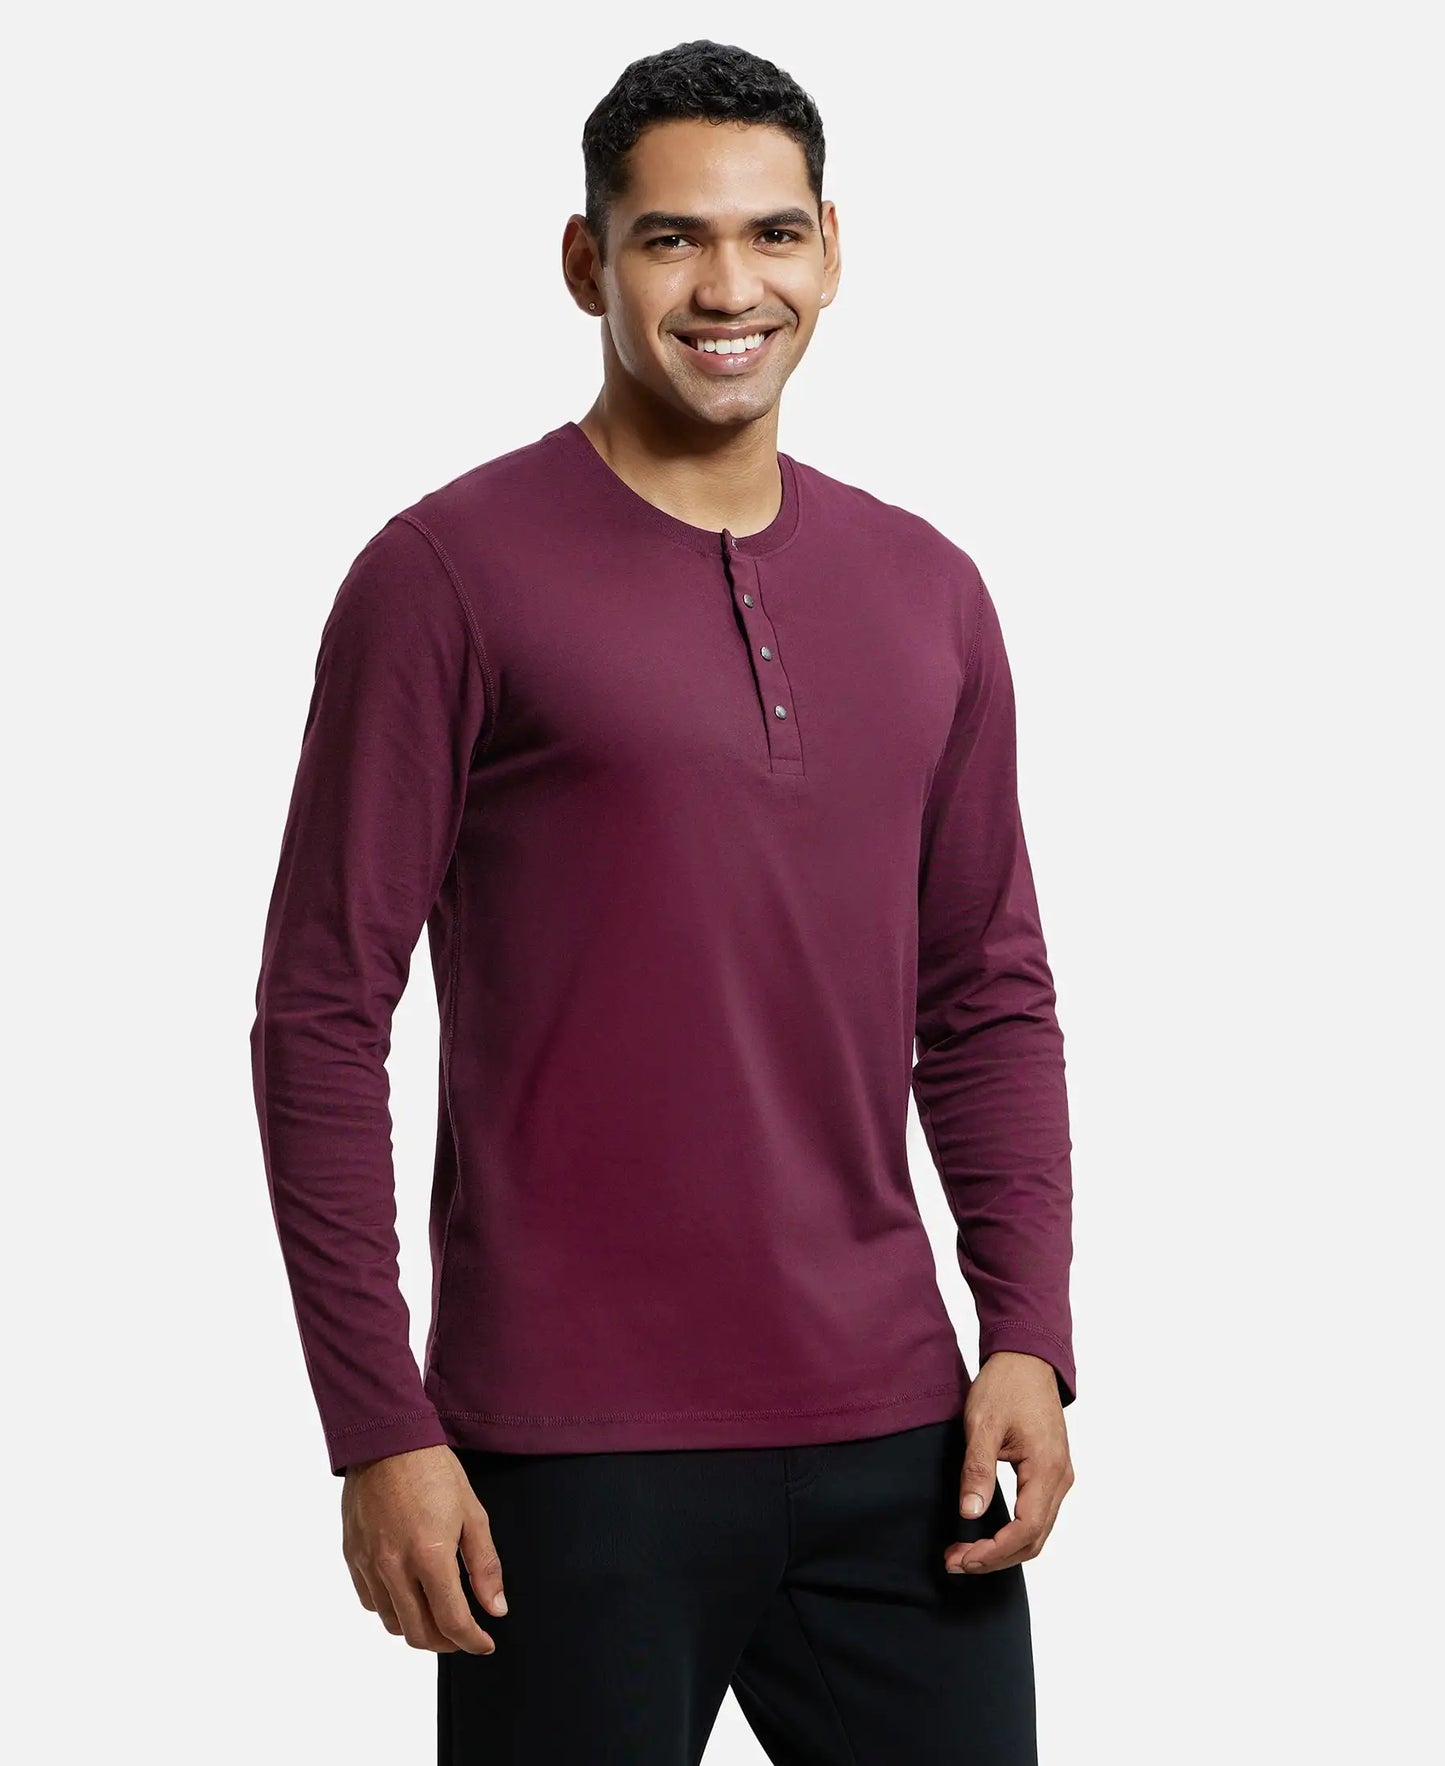 Super Combed Cotton Rich Solid Full Sleeve Henley T-Shirt - Wine Tasting-2